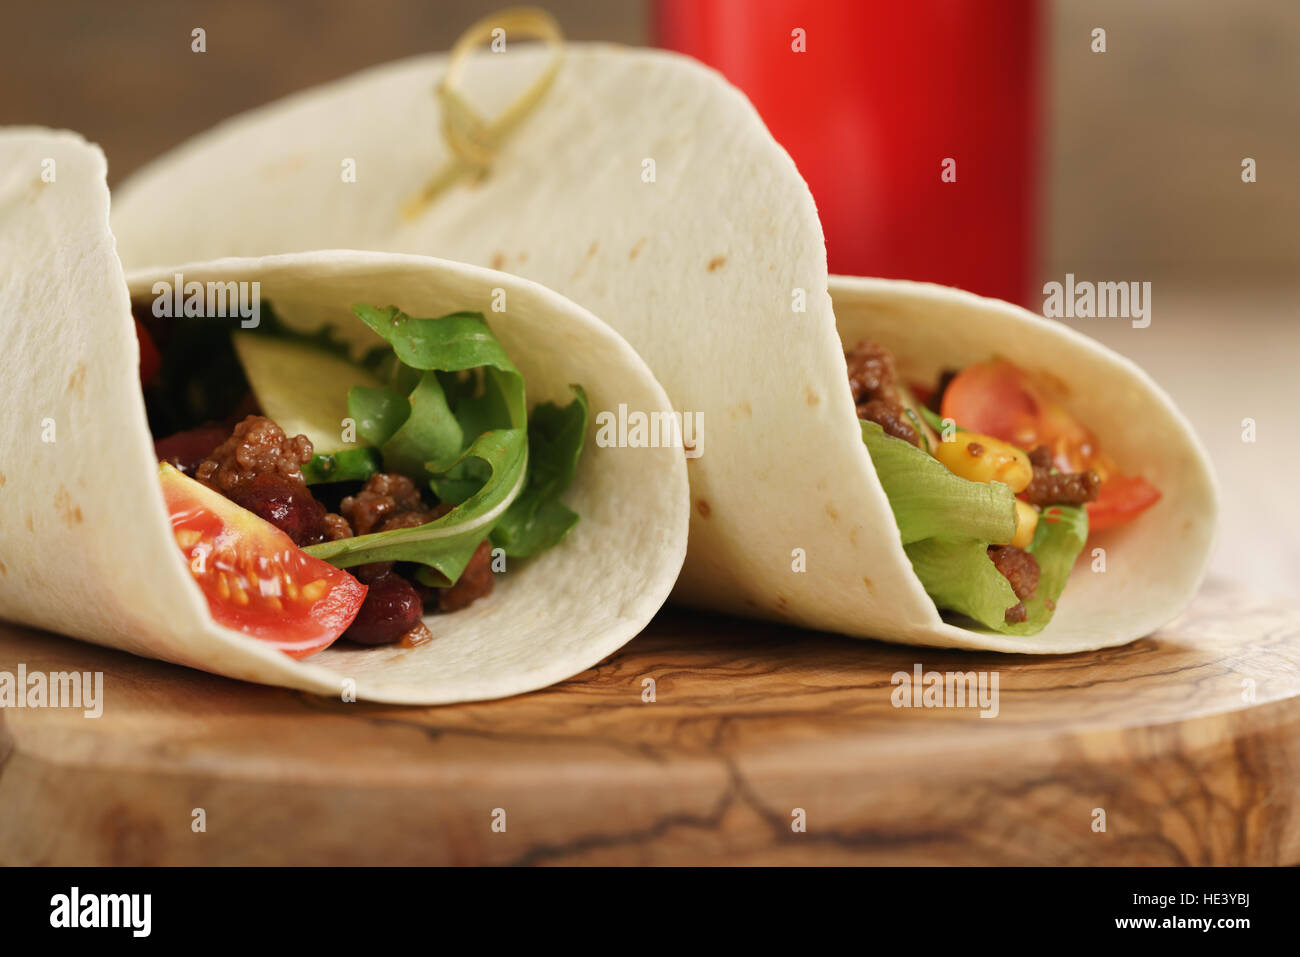 fresh homemade tortilla wrap sandwiches with beef and vegetables on olive board Stock Photo